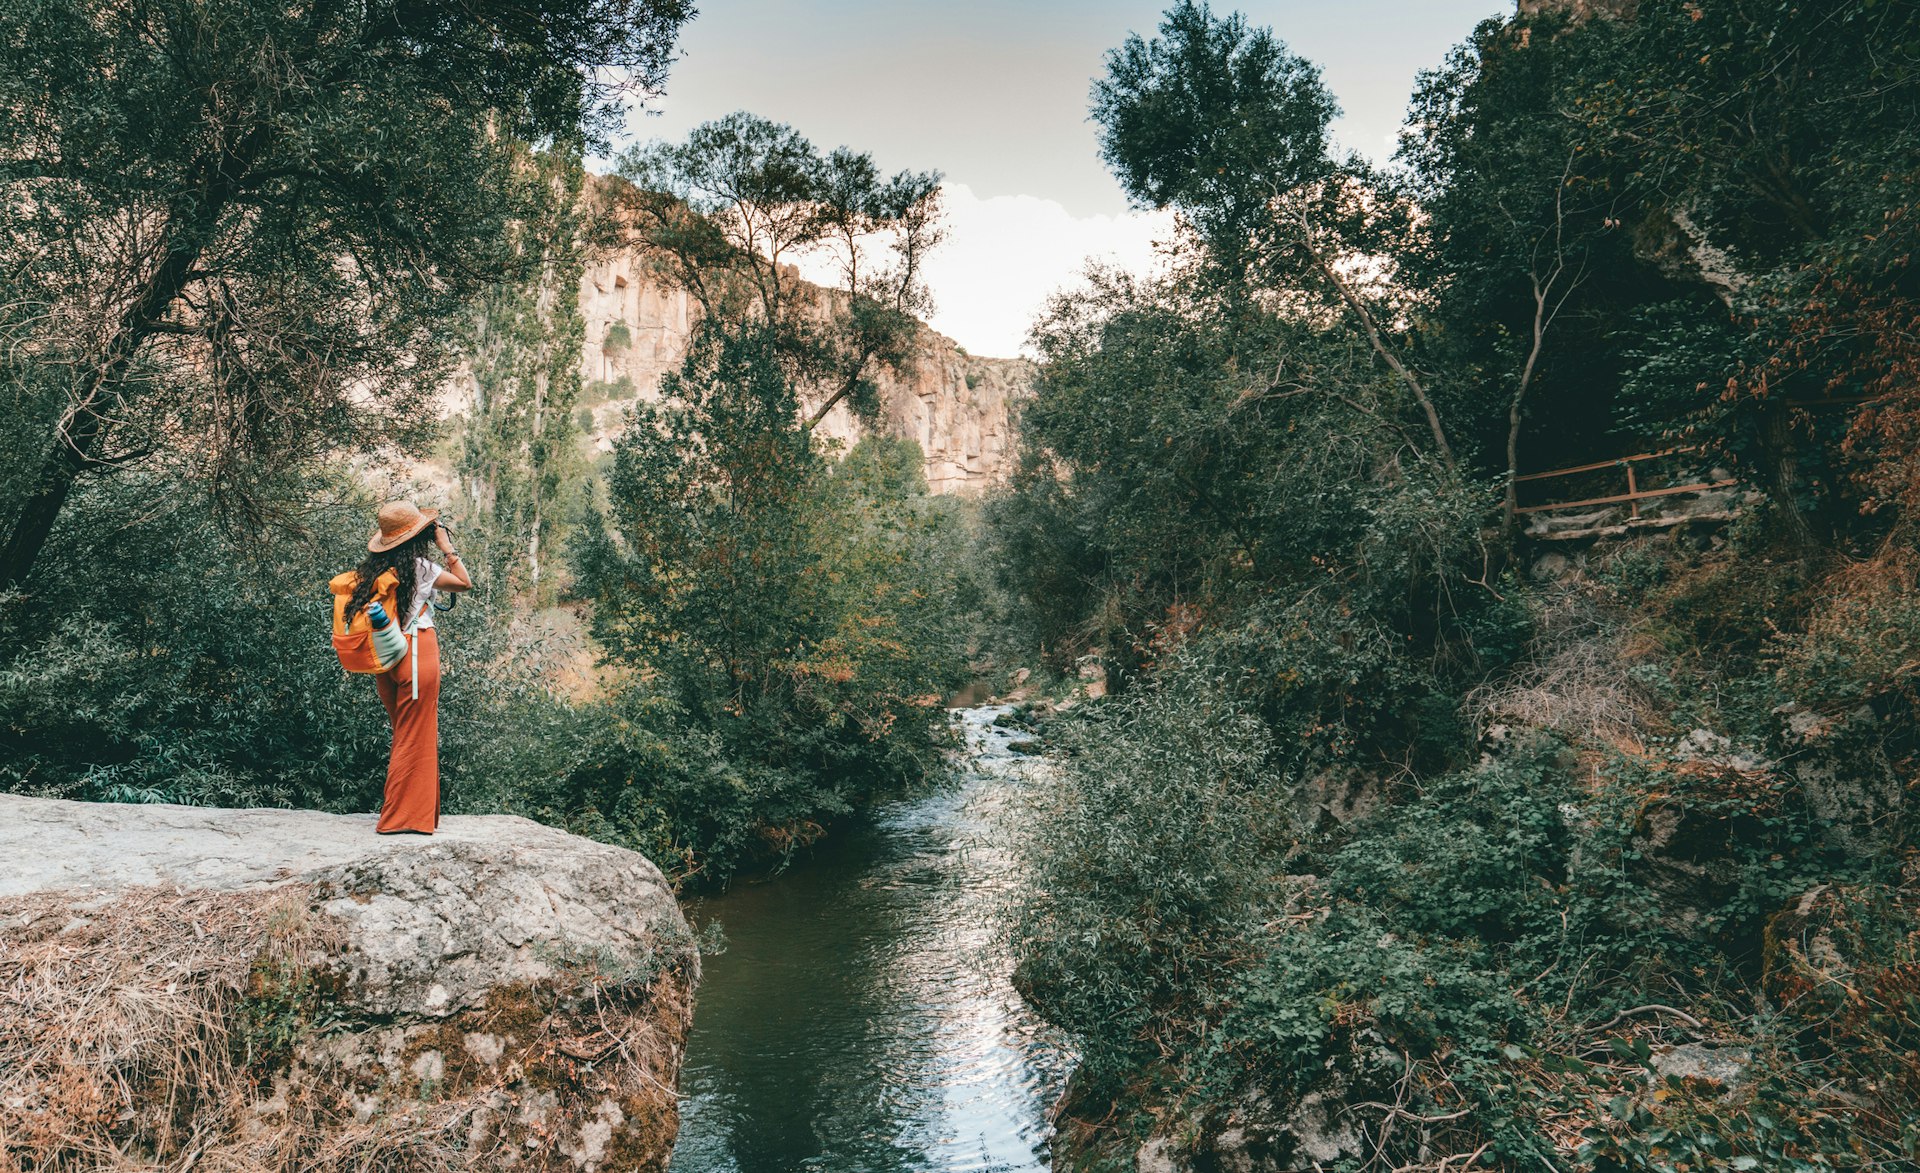 A woman standing next to a river in Ihlara Valley, Turkey